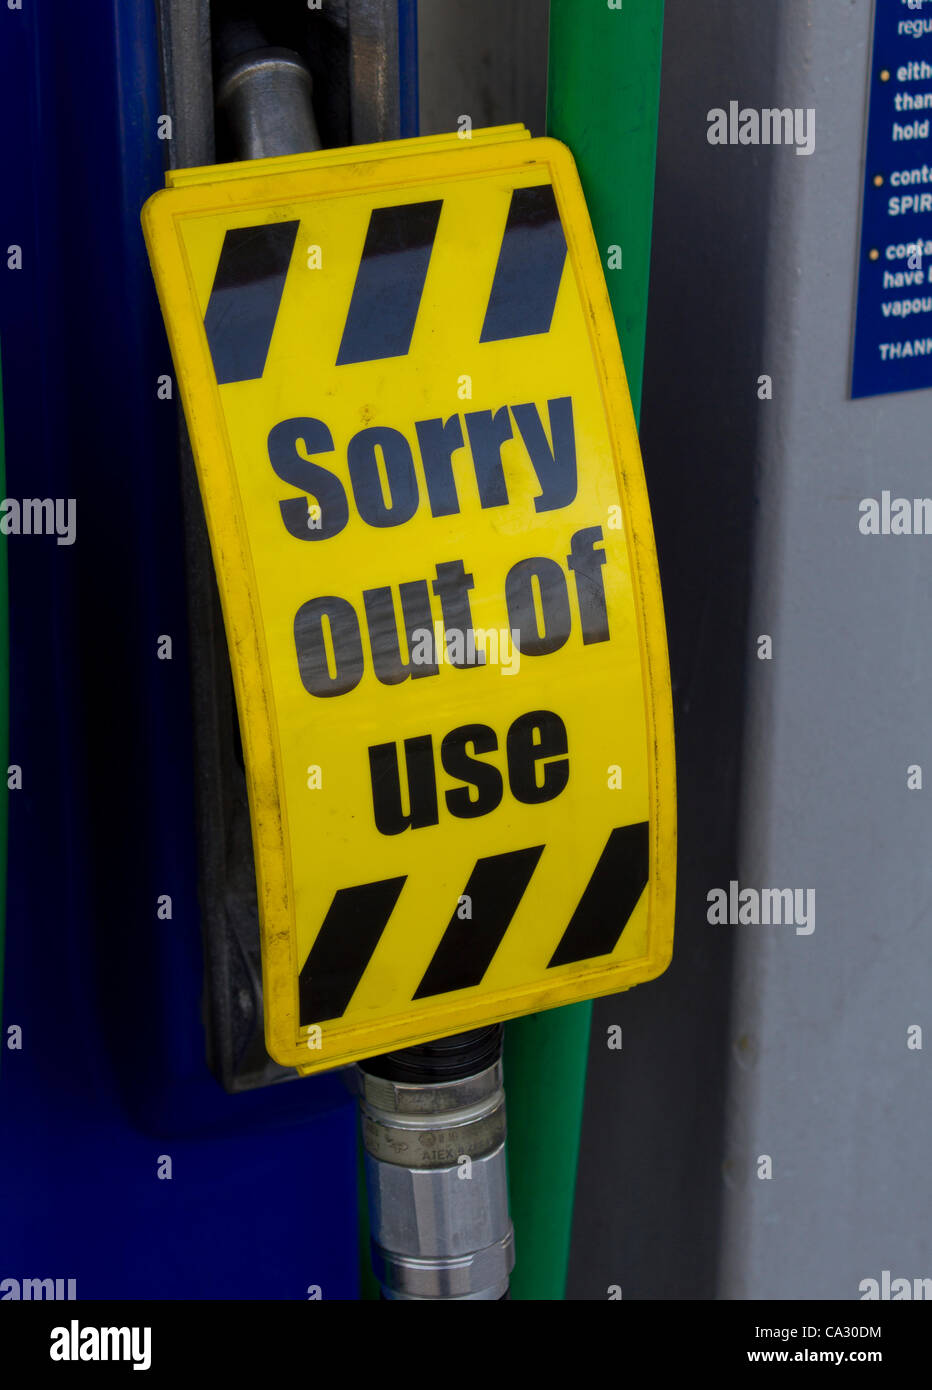 Sorry Not in Use, unleaded fuel pump at Sainsburys (Upton, Merseyside) showing the current panic buying on fuel due to potential tanker driver strike Stock Photo